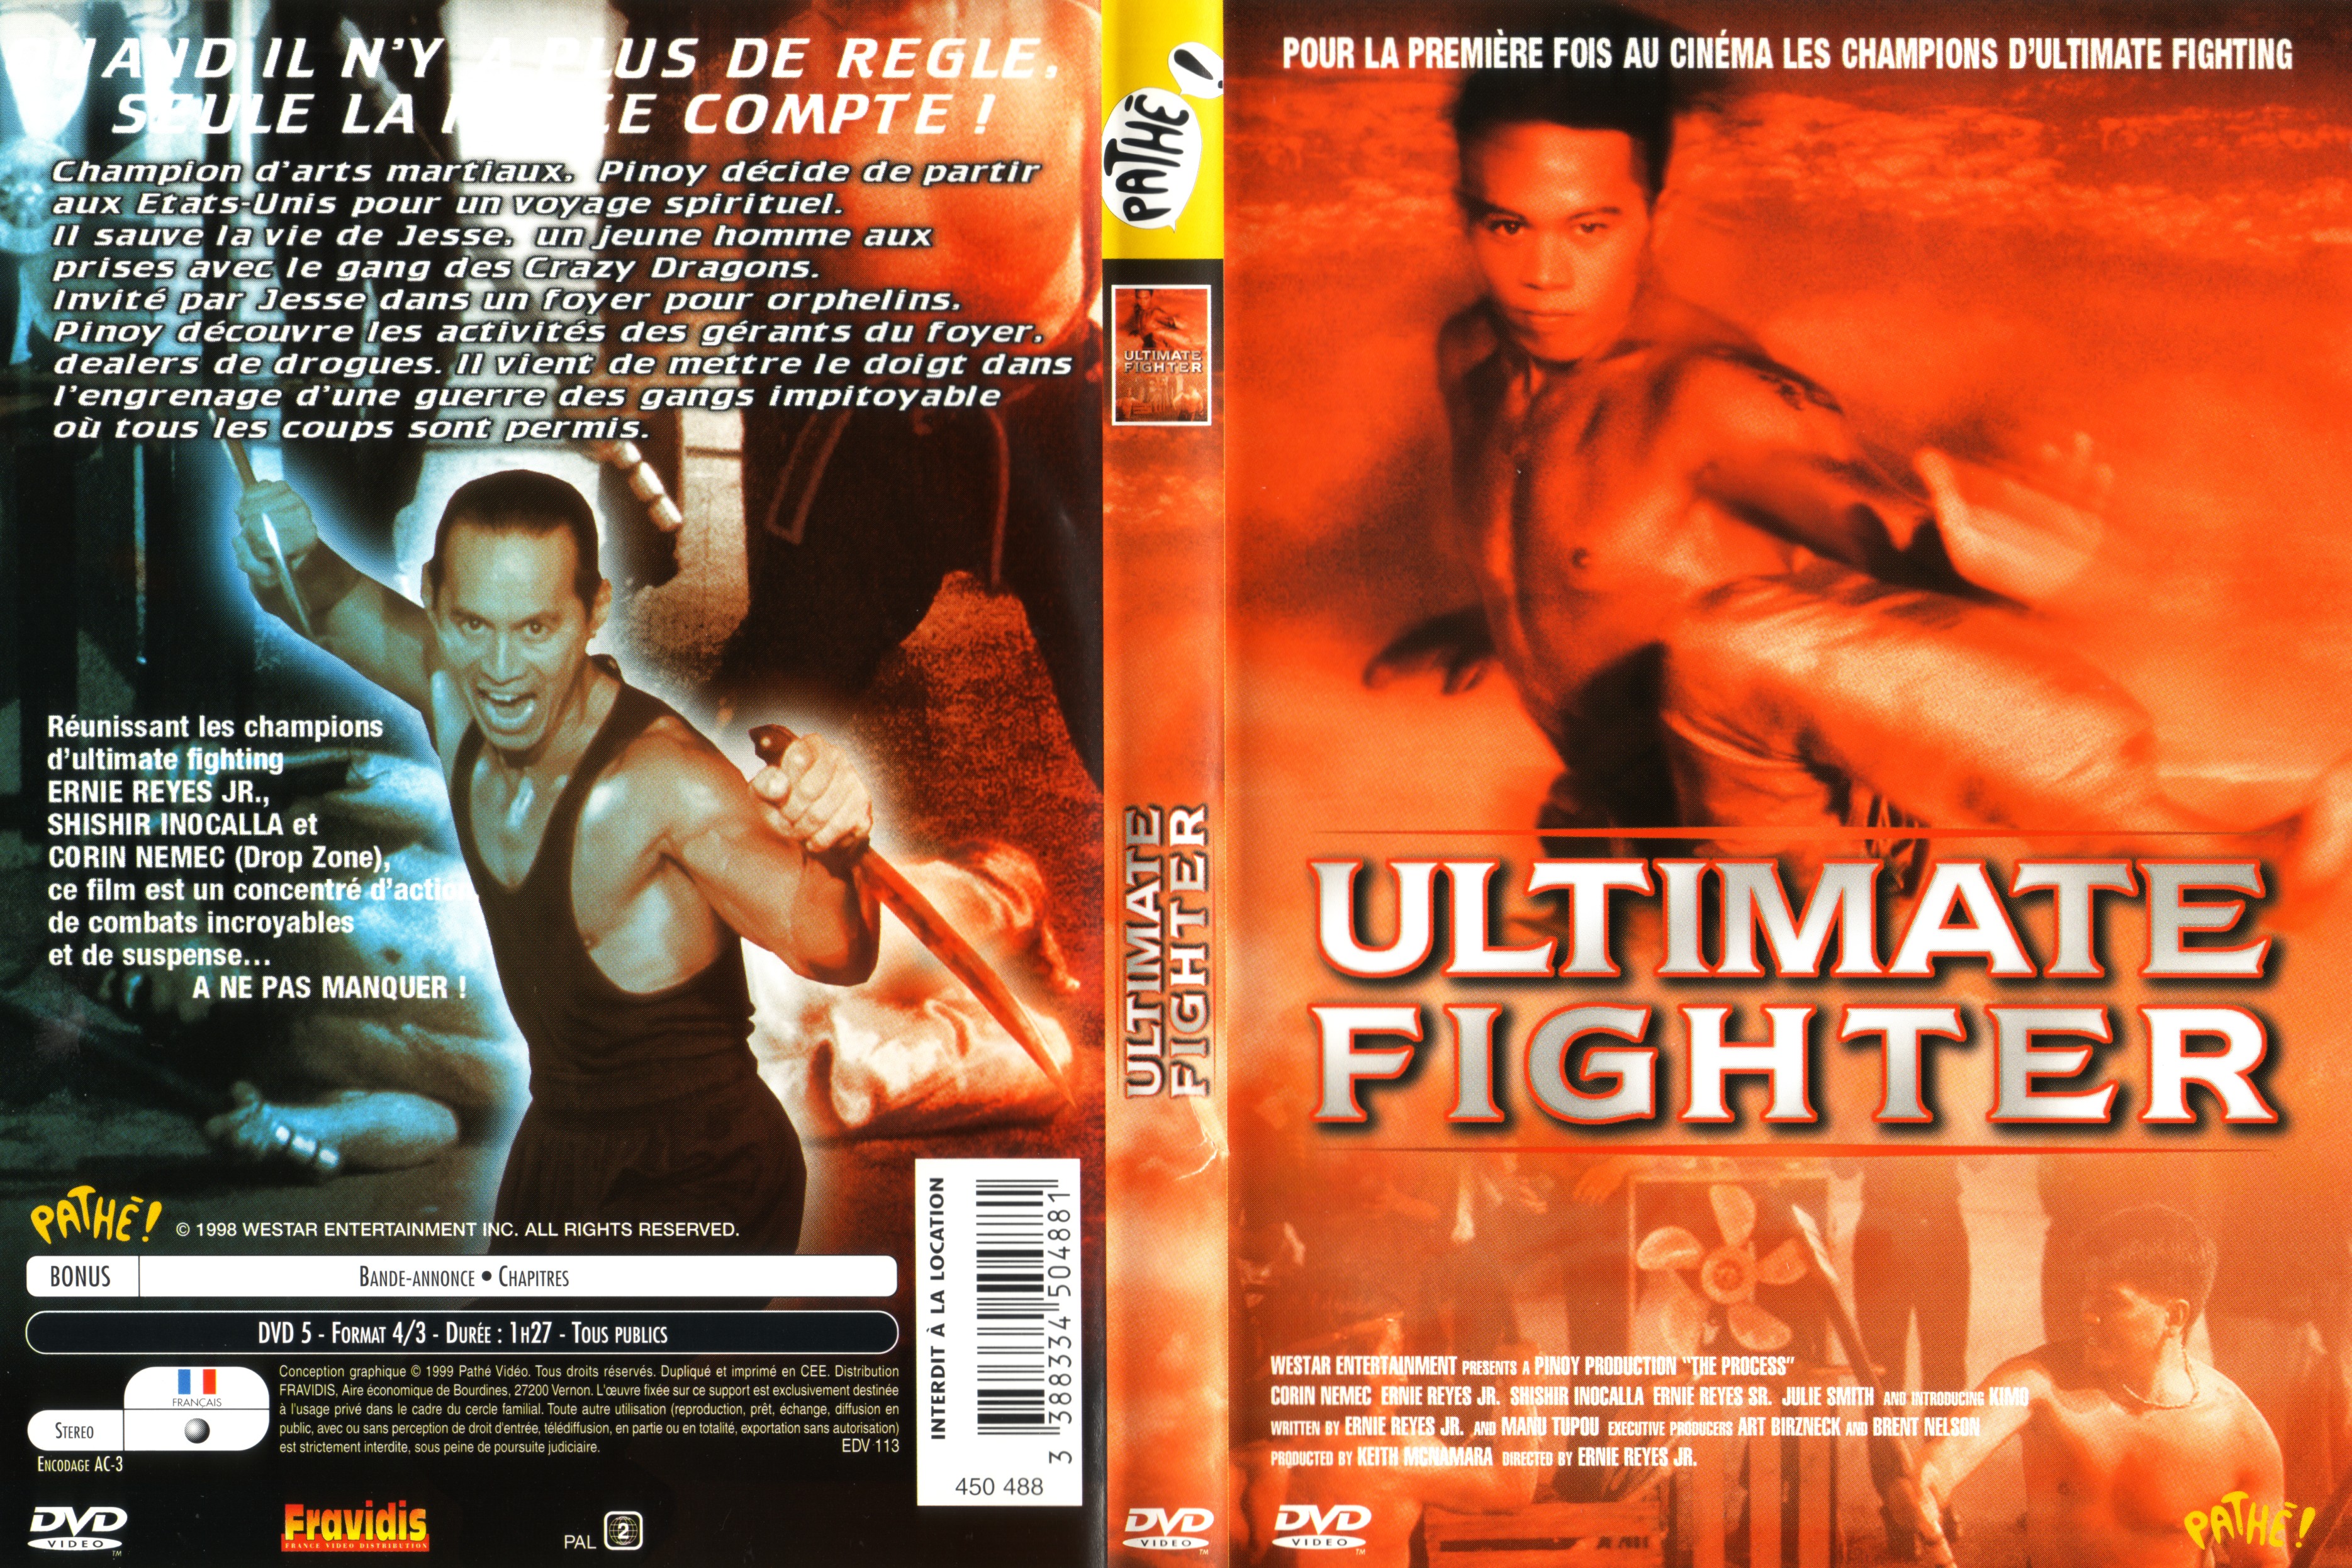 Jaquette DVD Ultimate fighter